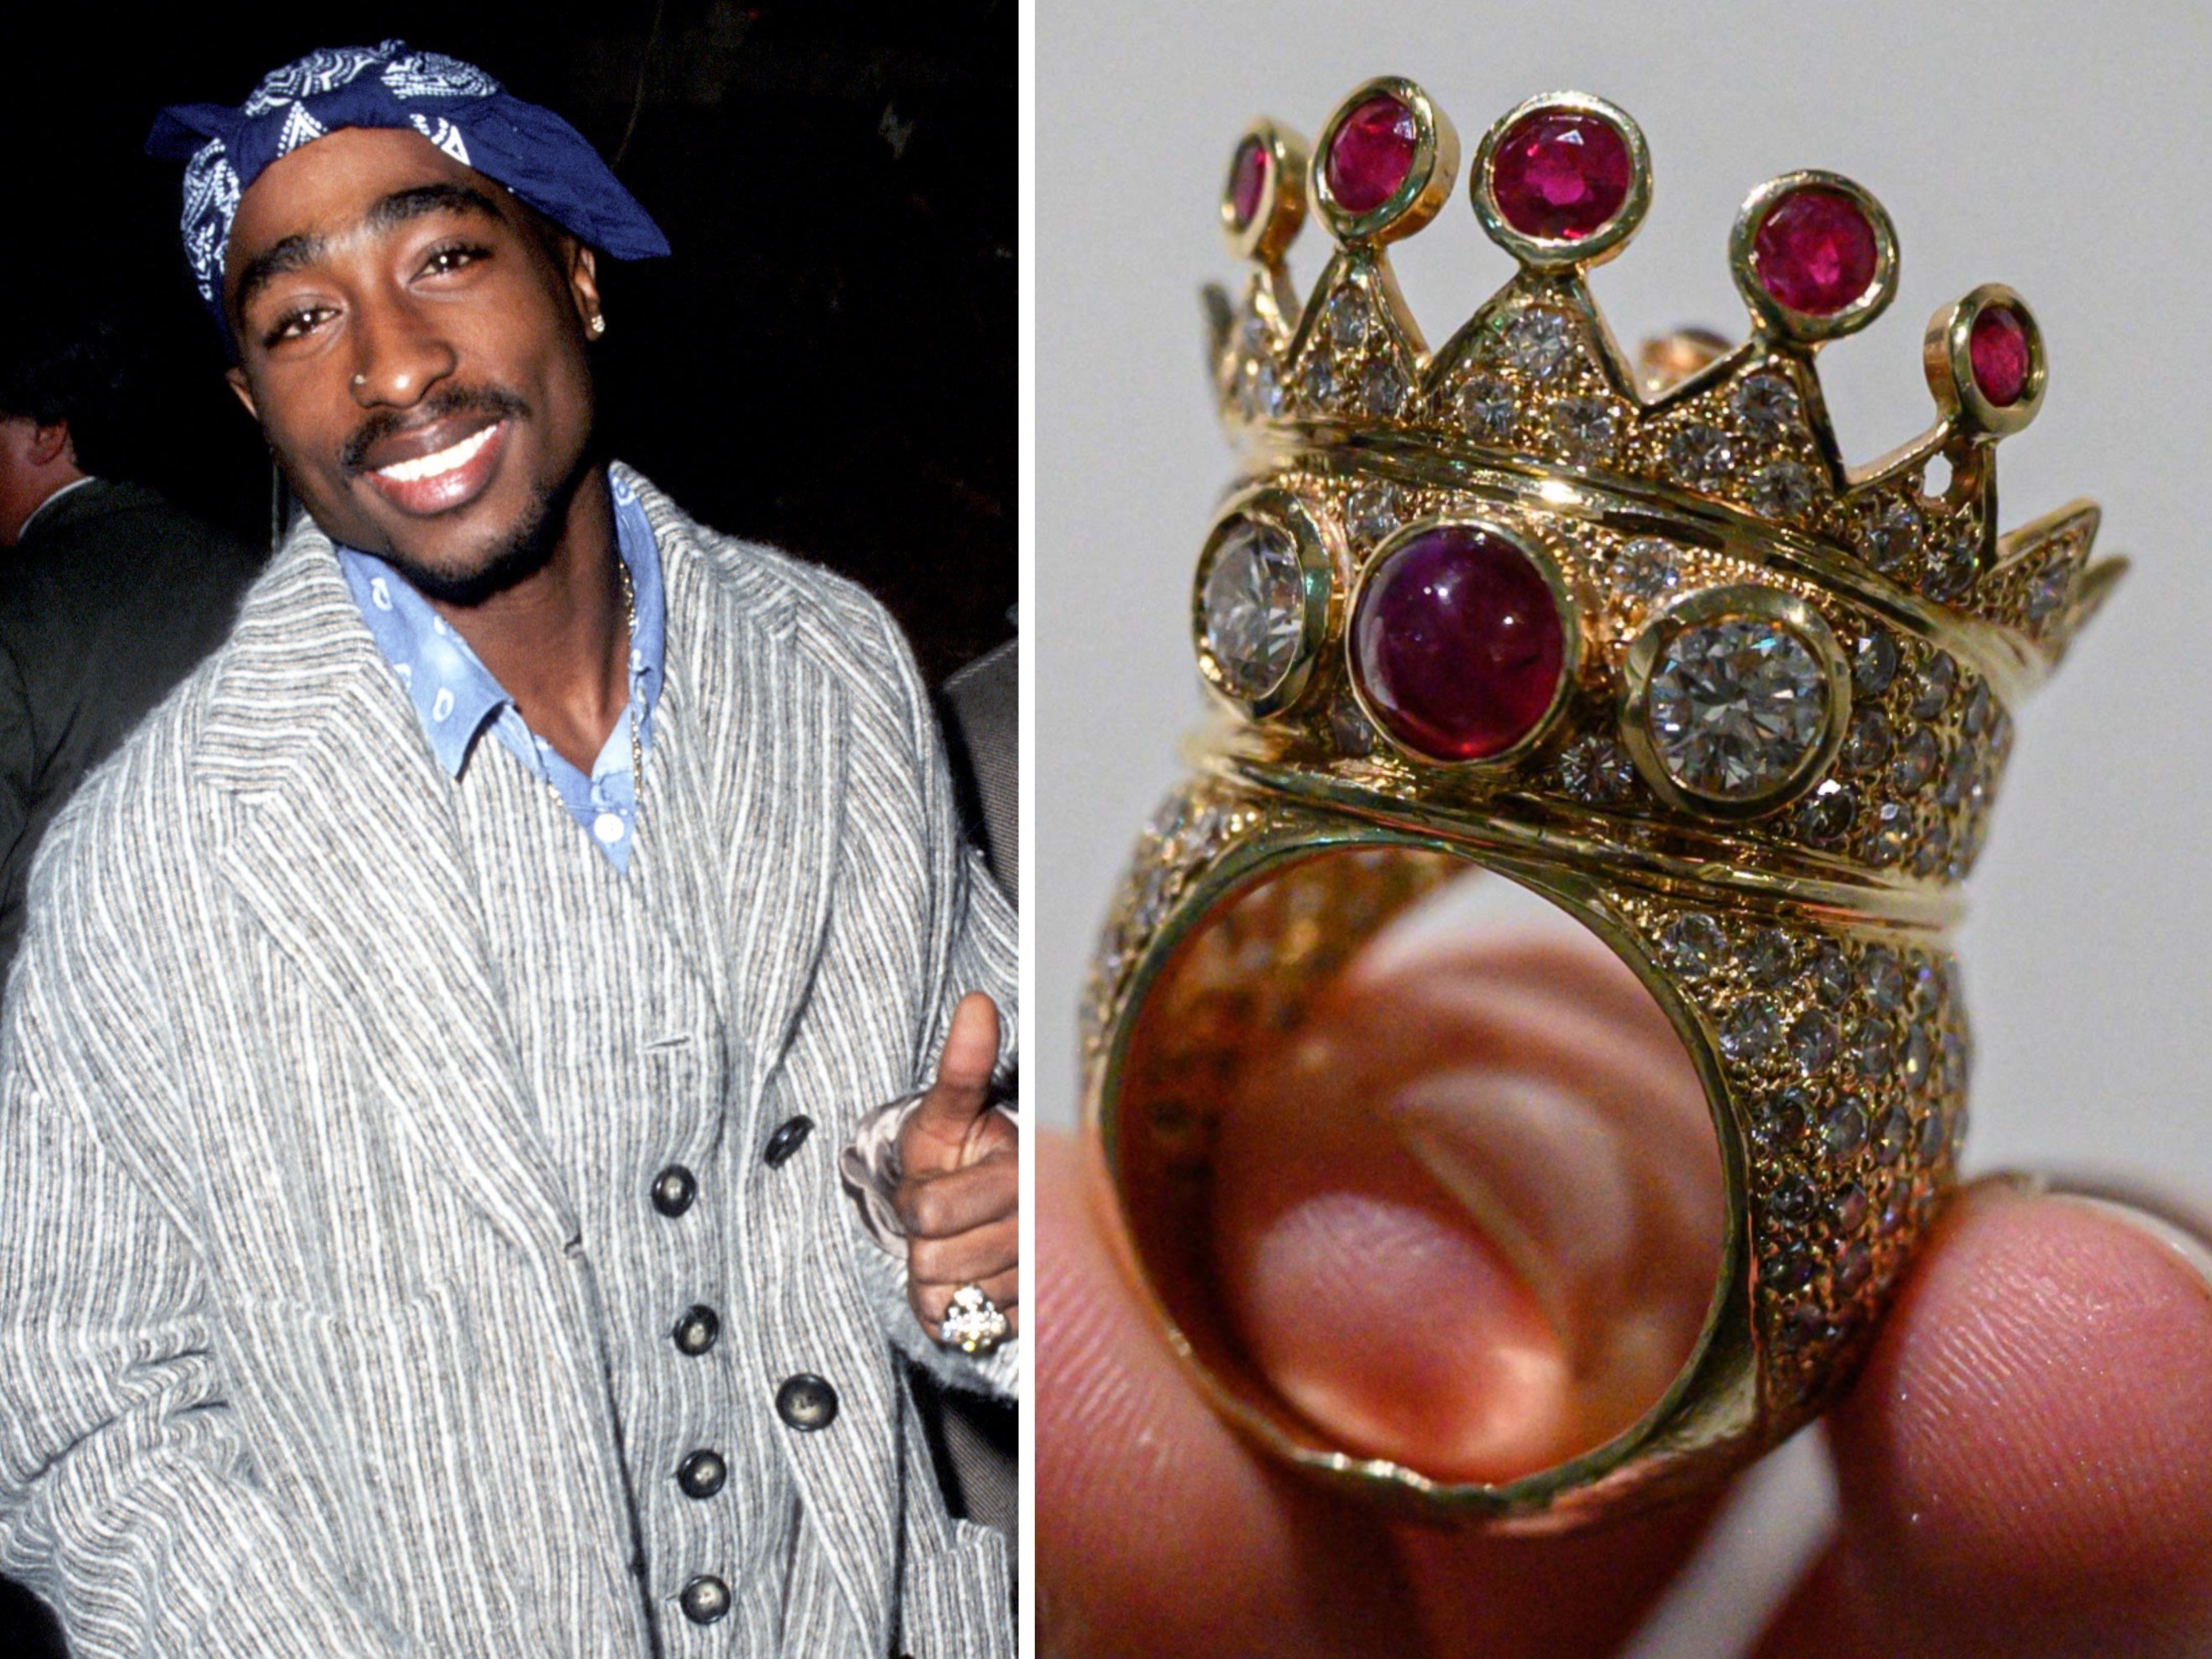 A ring that Tupac Shakur designed and wore during his last public appearance fetched a whopping US$1 million at a New York City auction. Photo: Getty